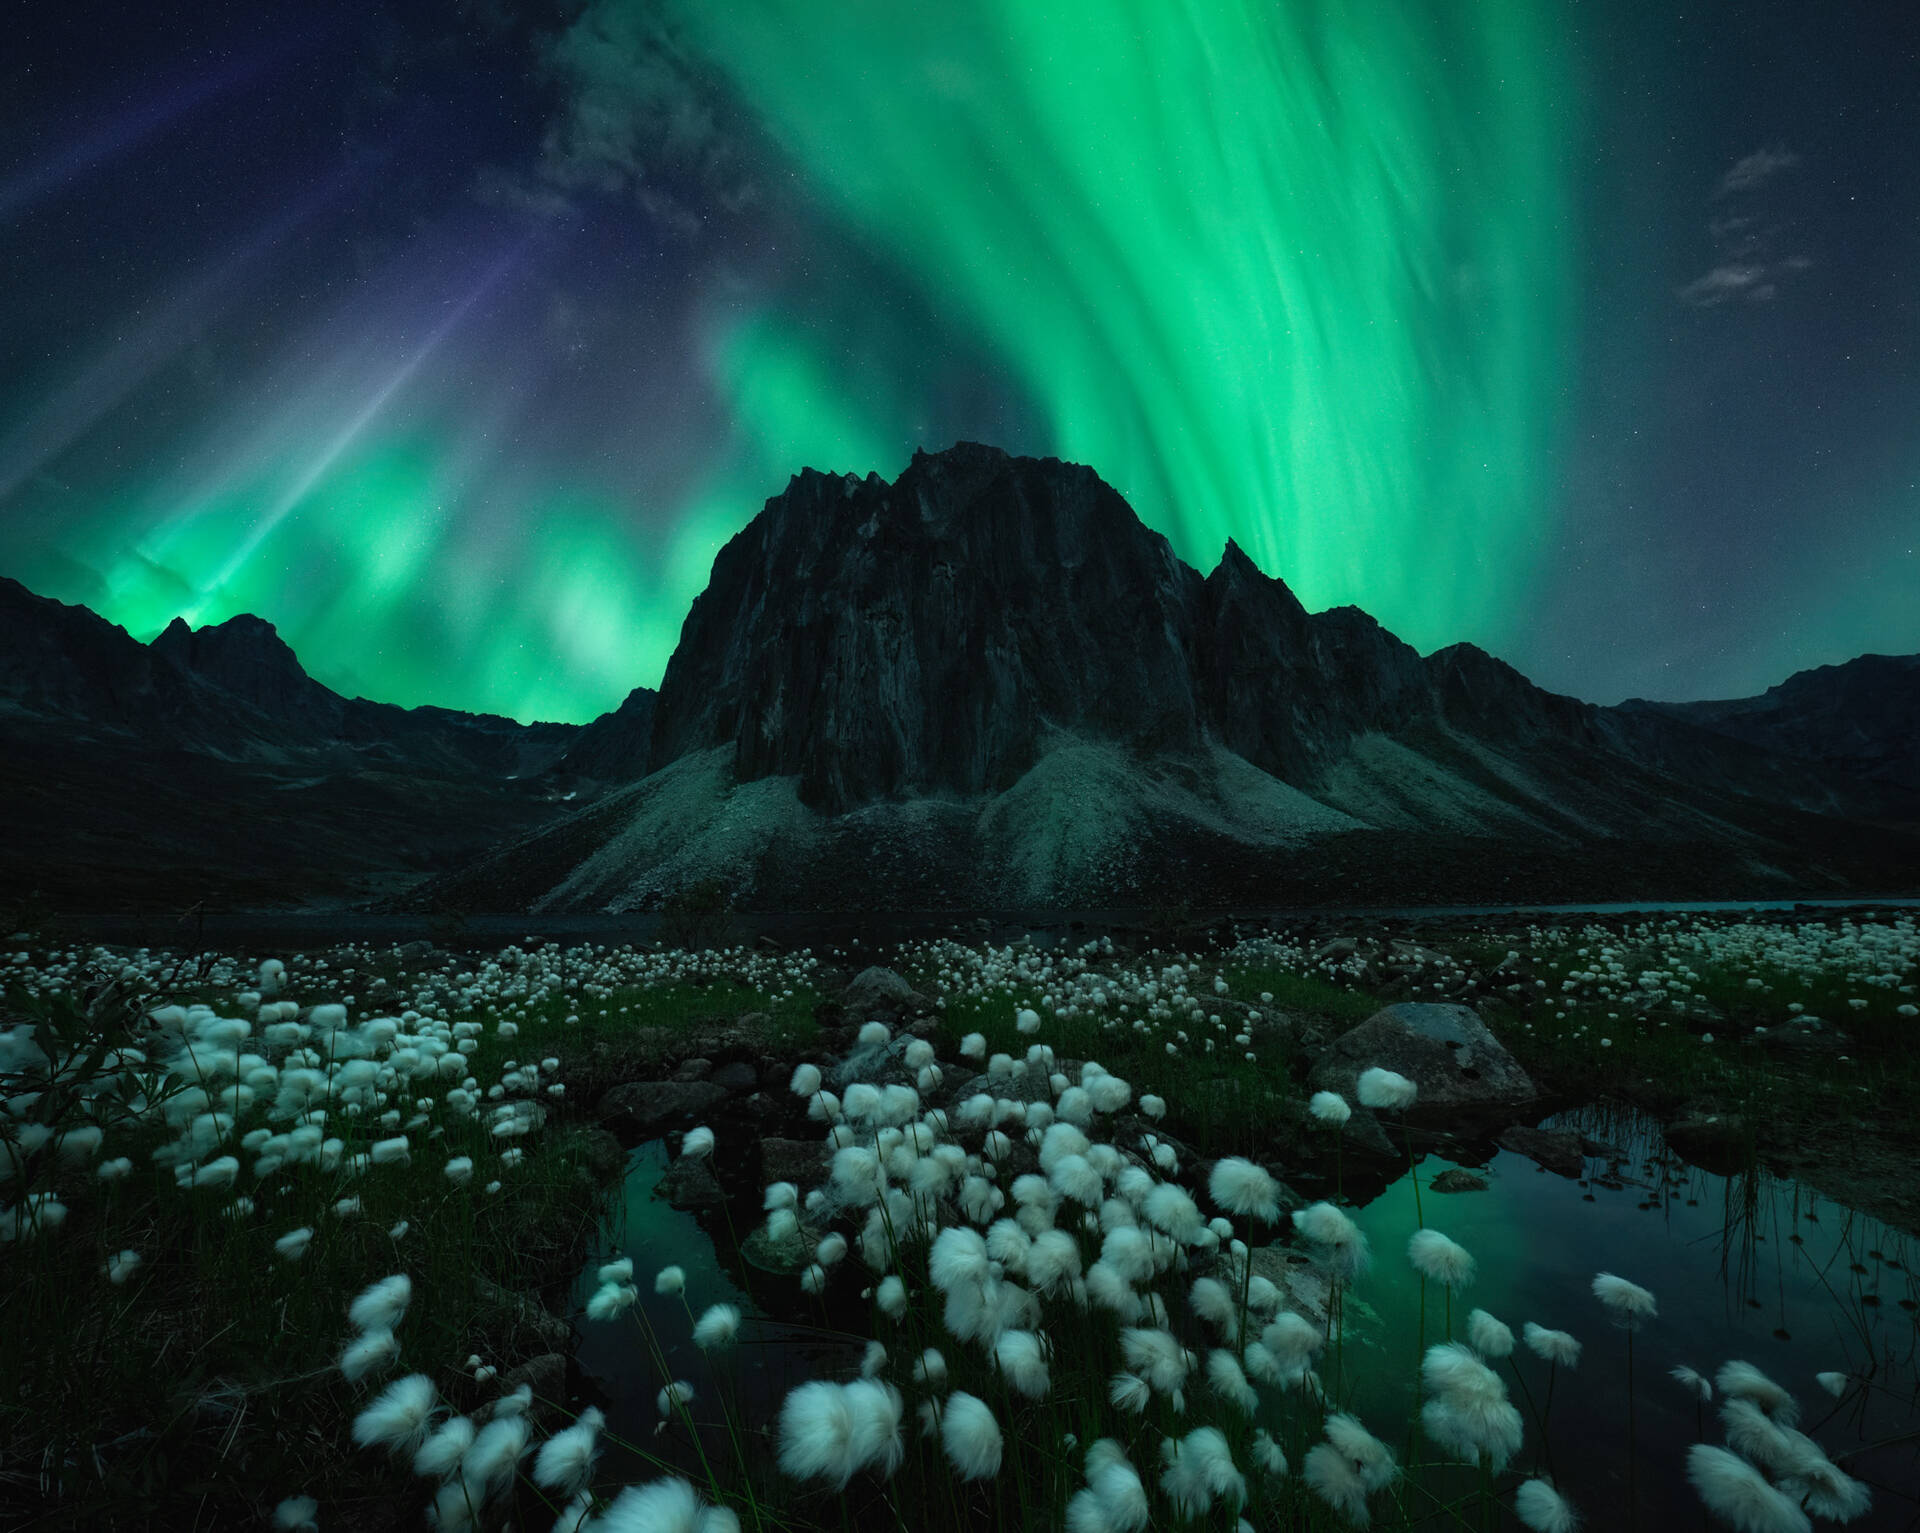 Northern Lights covering the night sky over a mountain and a cotton field